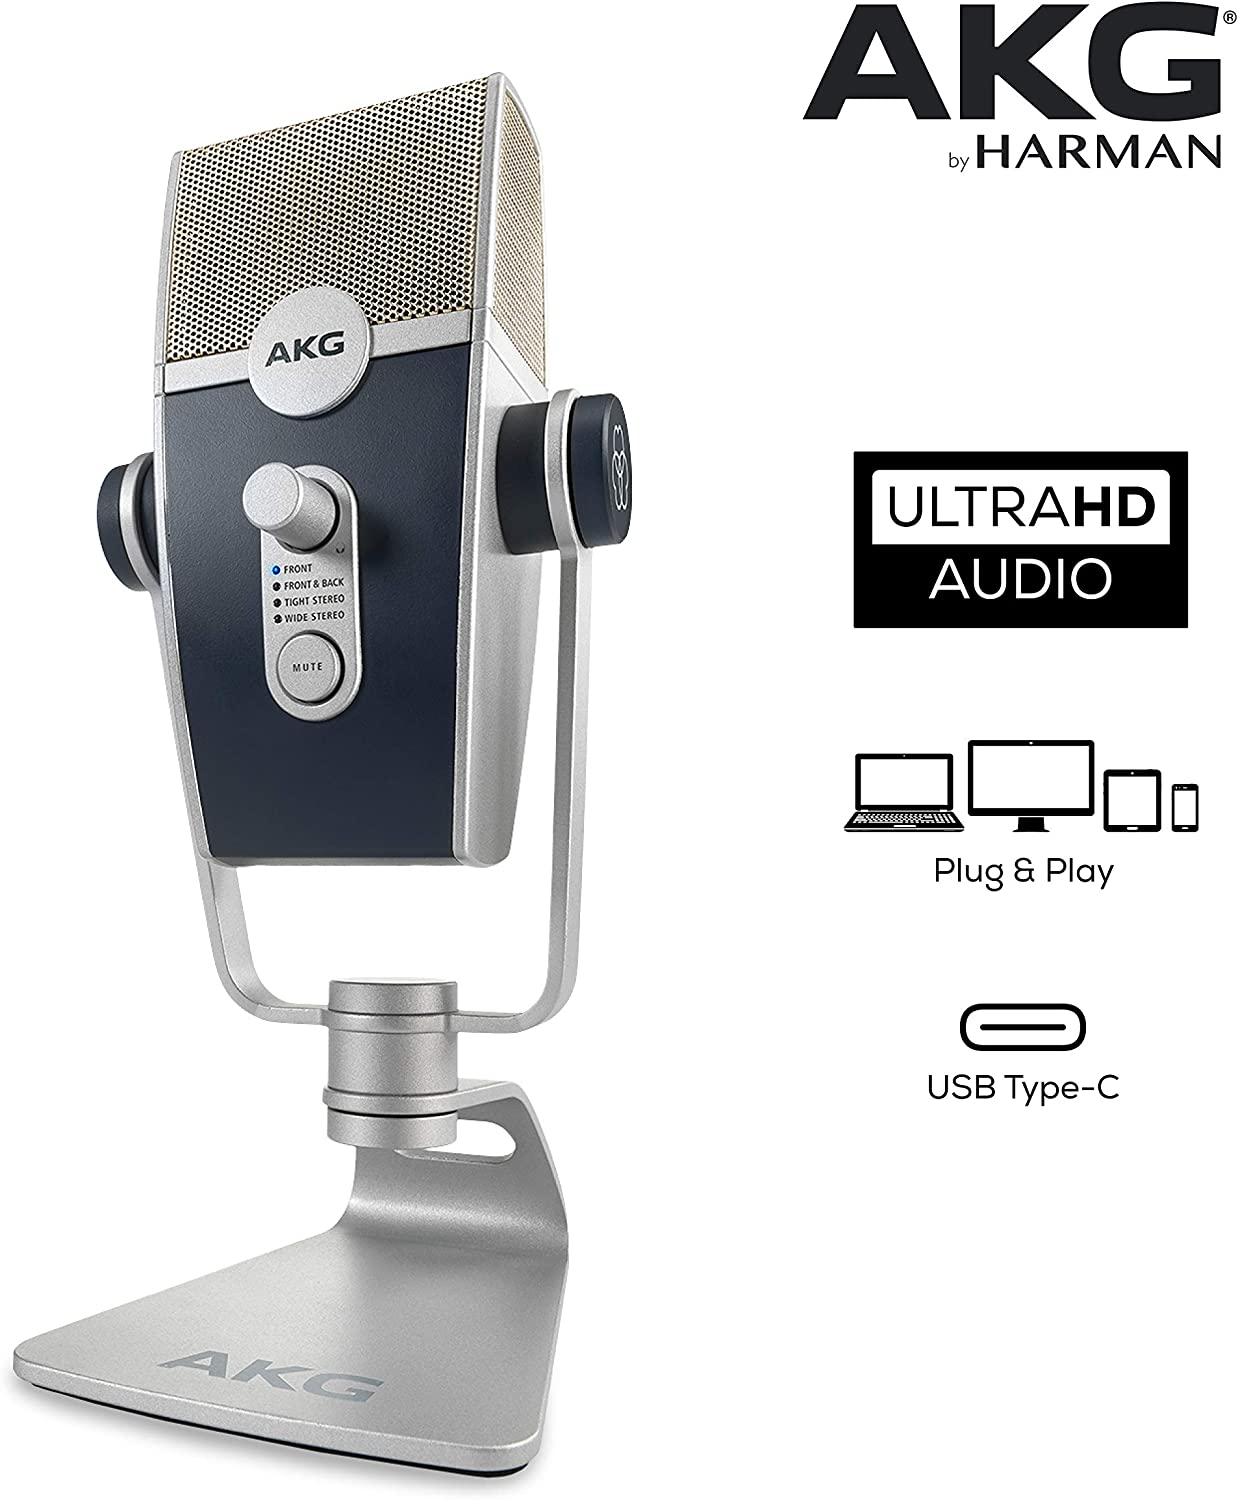 AKG Podcaster Essentials Lyra USB Microphone And K371 Headphones